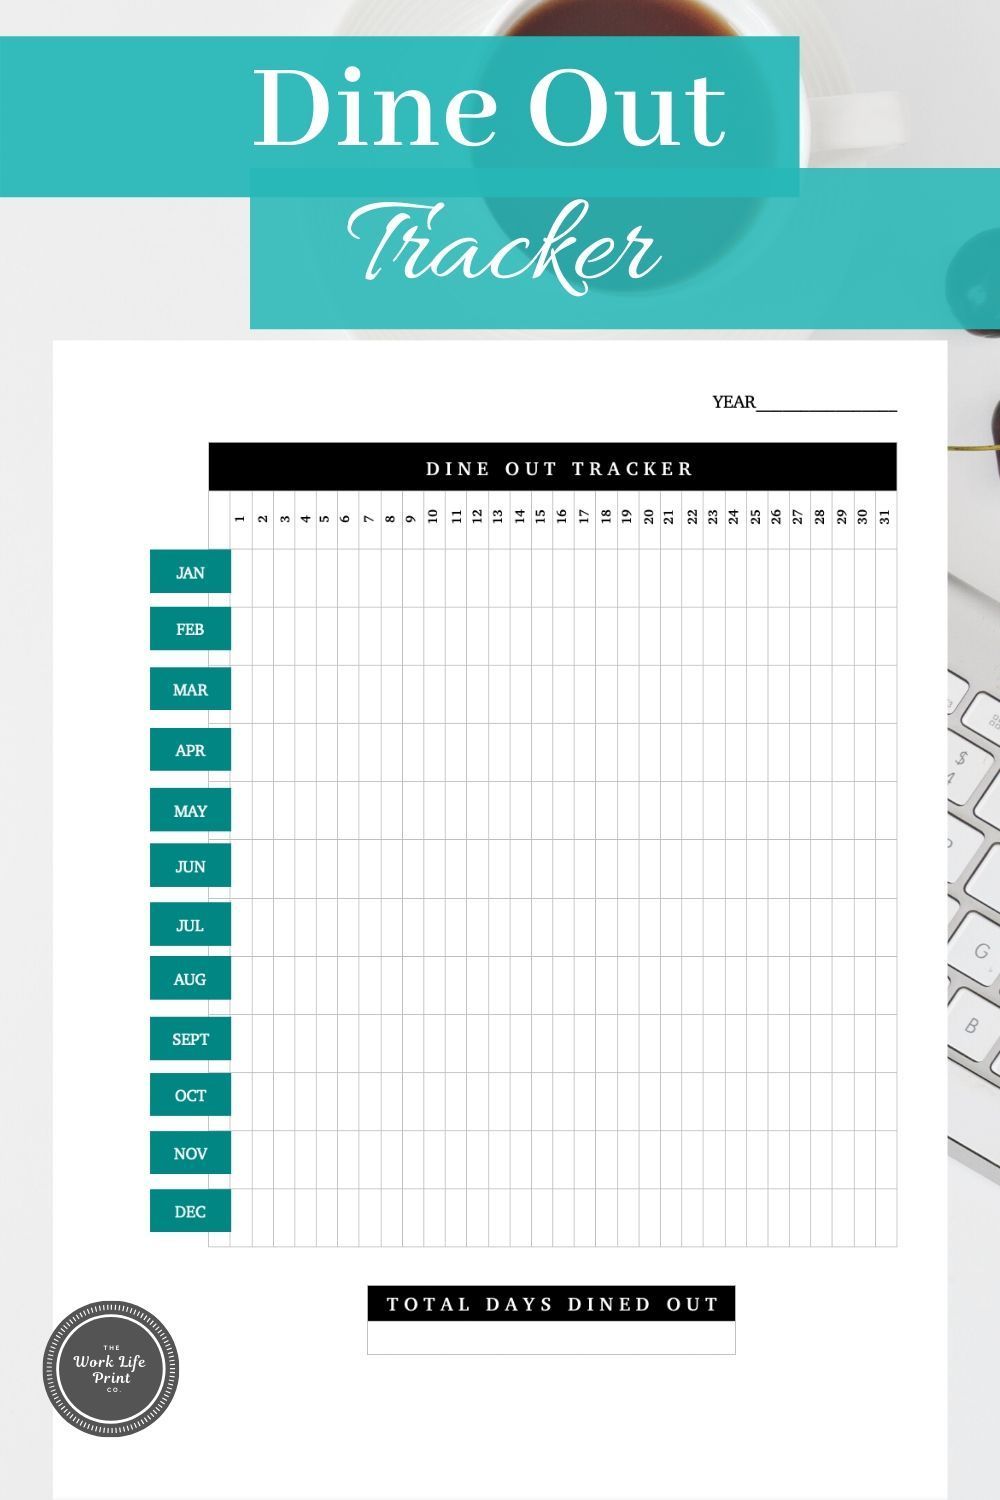 Budget Printables-Dining Out Finance, Health, and Fitness Tracker -   fitness Tracker budget